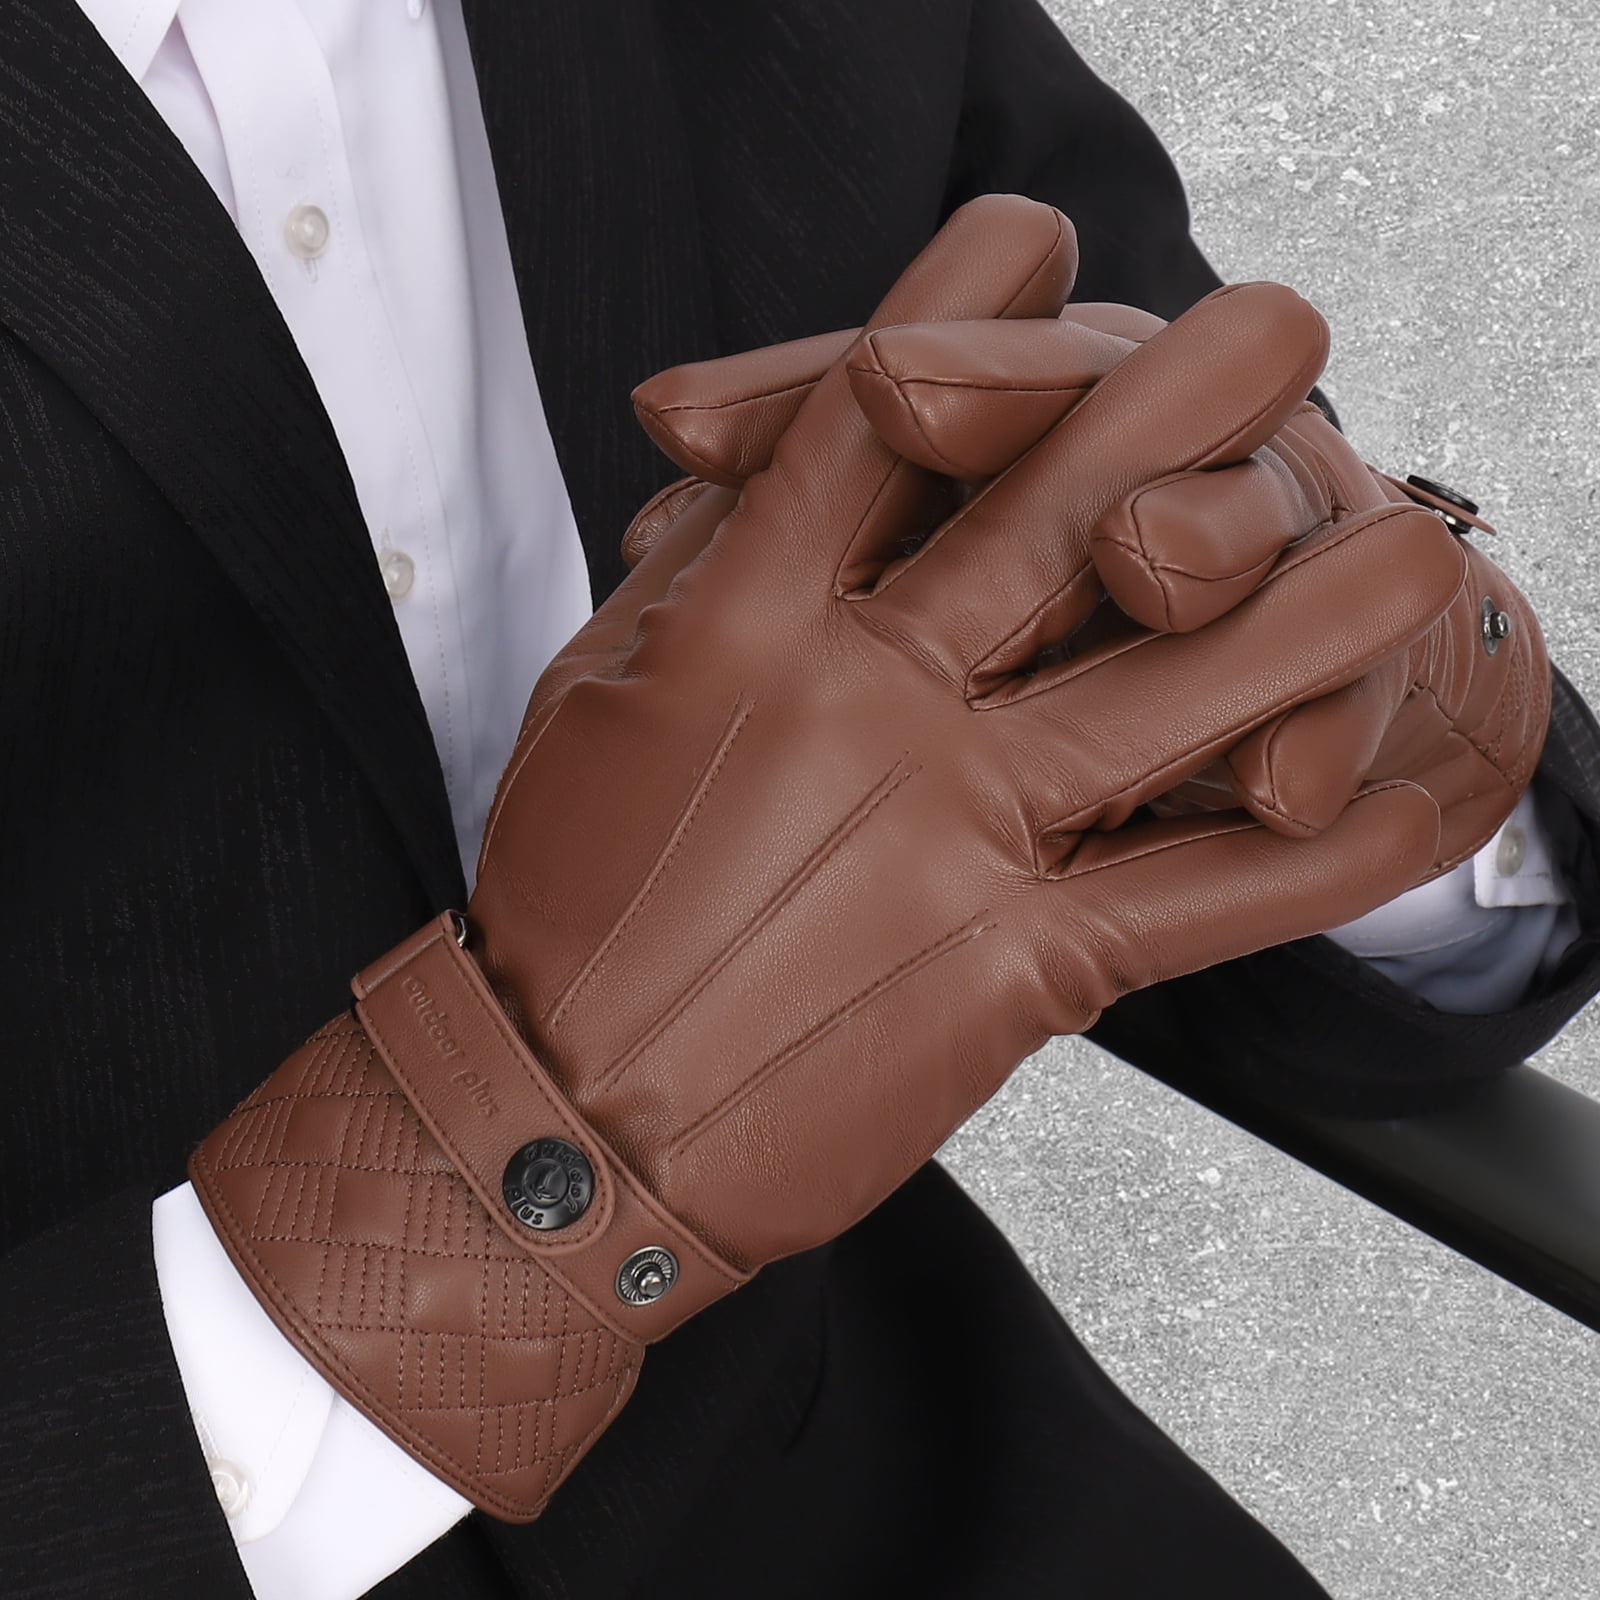 Leather Gloves for Men, Warm Wool Lined PU Leather Winter